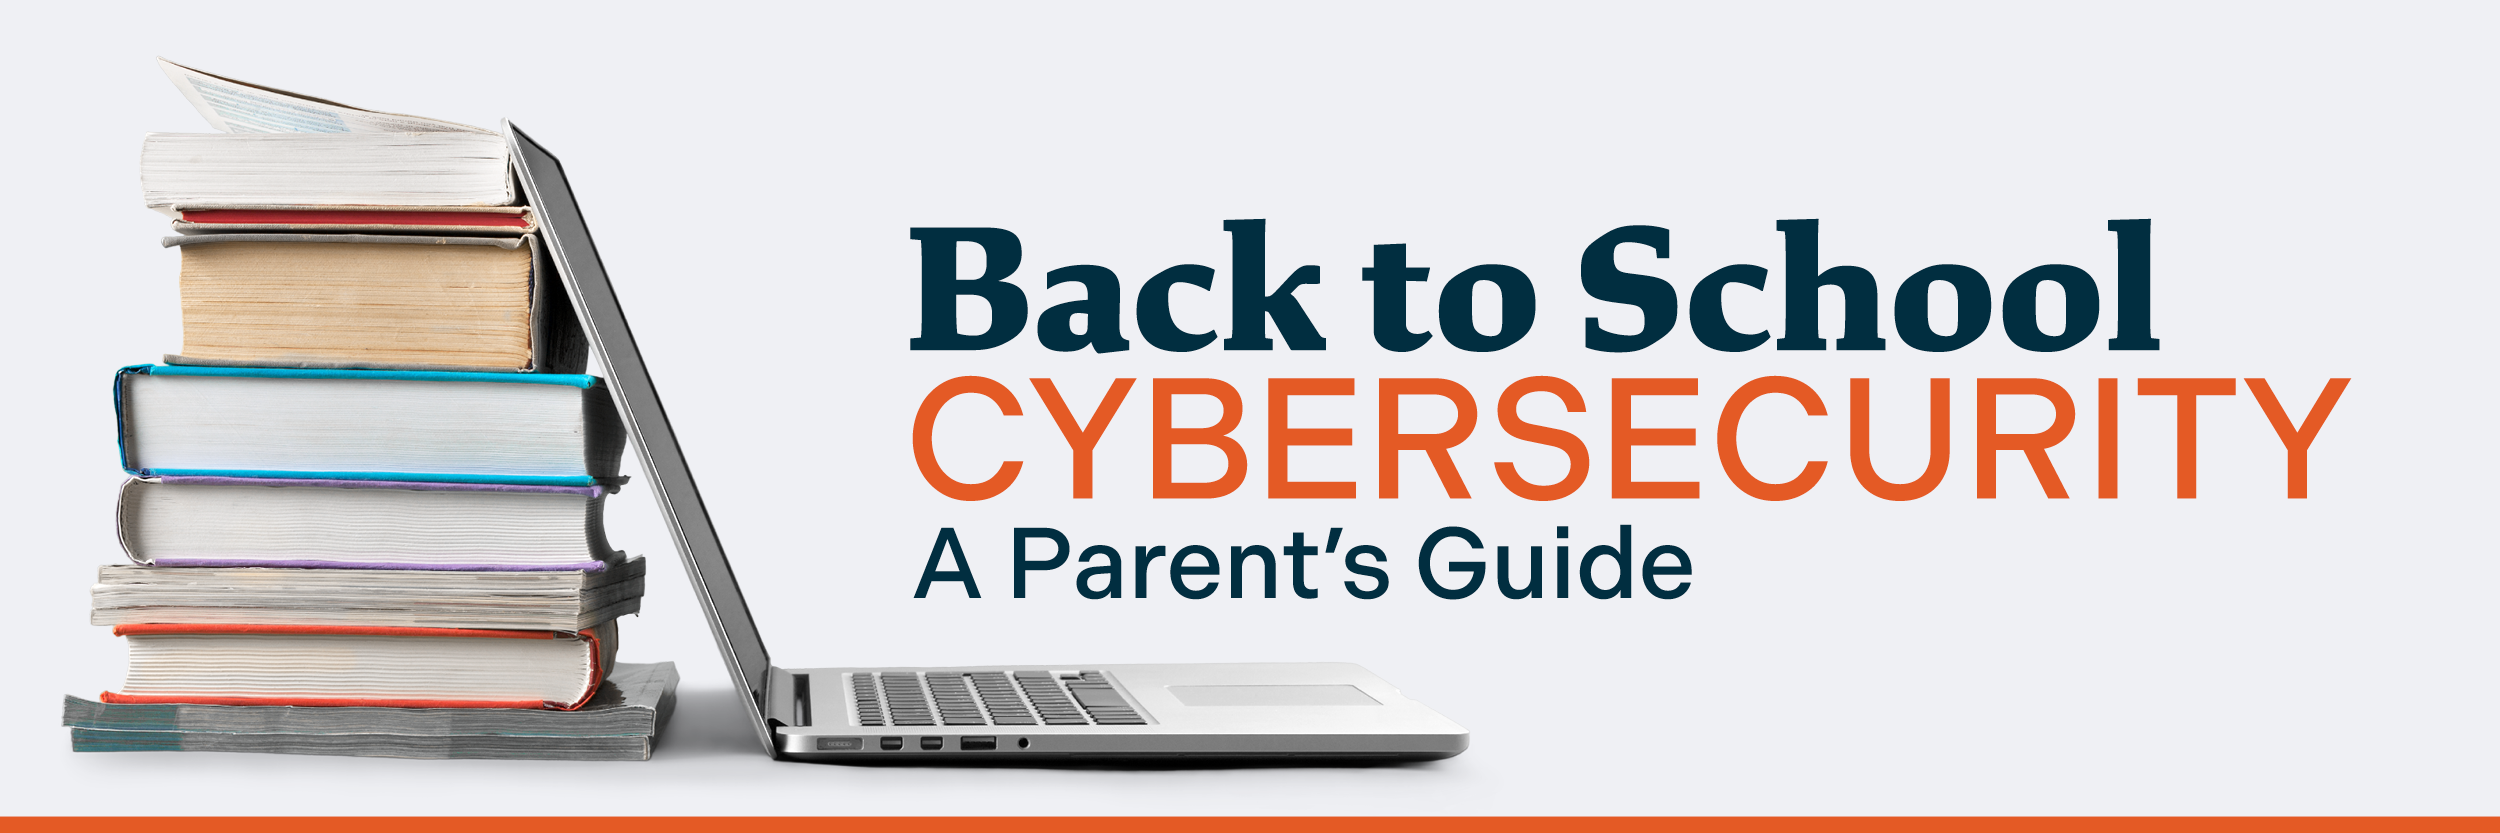 Prepare for School with Peace of Mind: Essential Child Online Safety Tips for Parents in the Cyber Age!